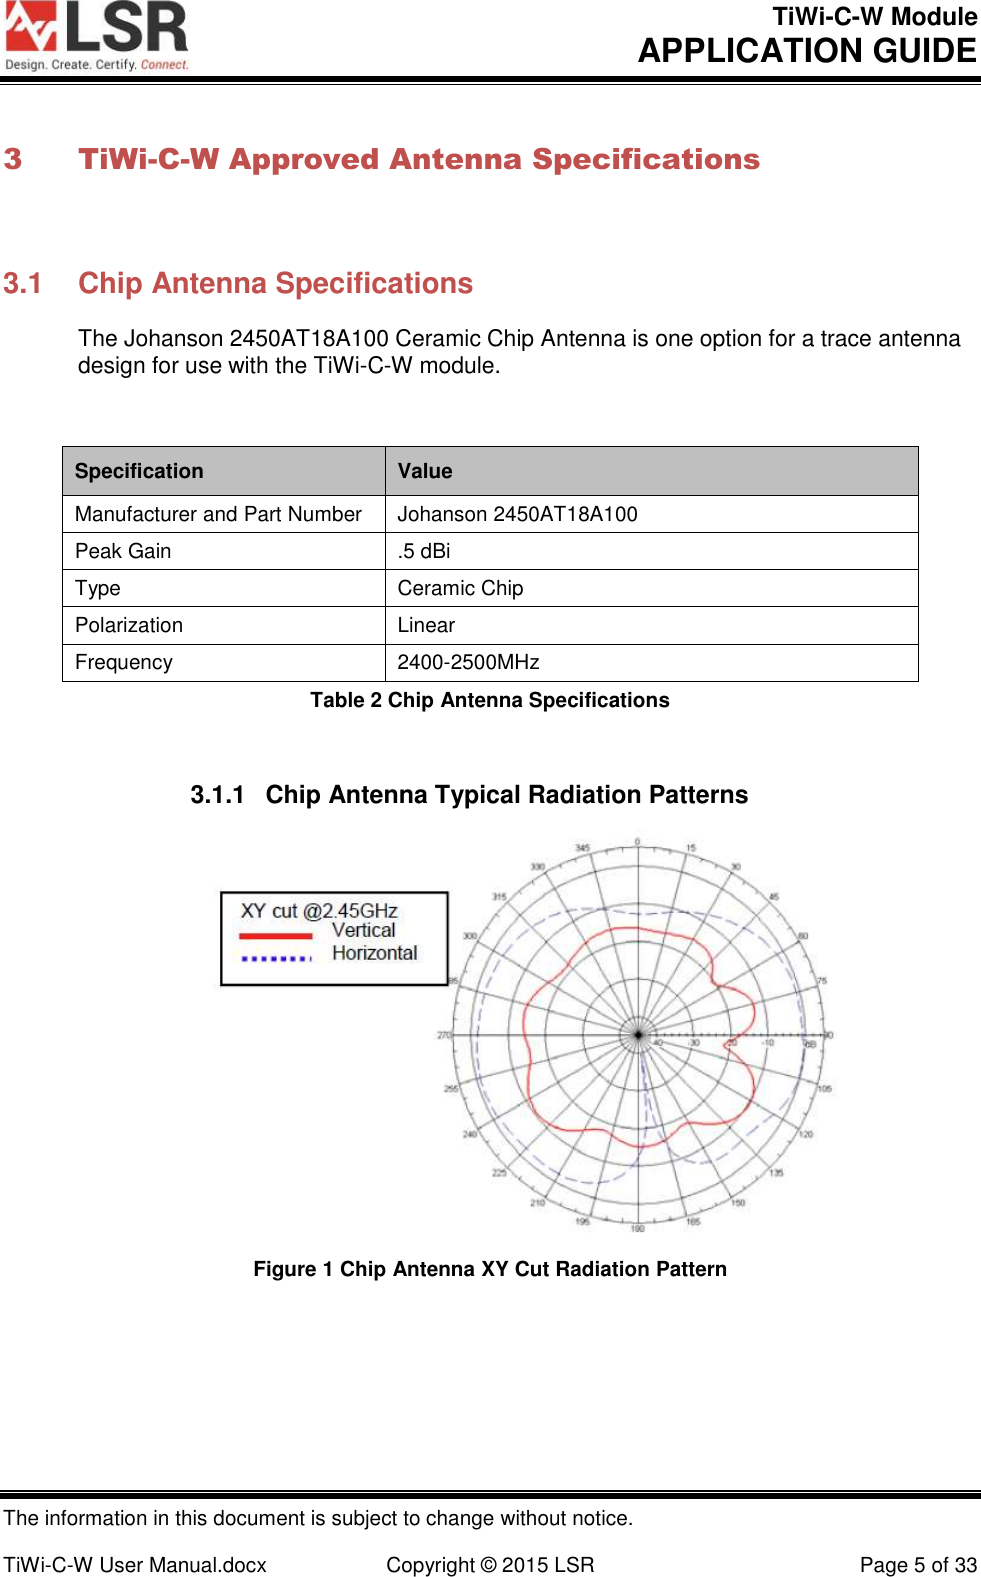 TiWi-C-W Module       APPLICATION GUIDE  The information in this document is subject to change without notice.  TiWi-C-W User Manual.docx  Copyright © 2015 LSR  Page 5 of 33 3 TiWi-C-W Approved Antenna Specifications  3.1  Chip Antenna Specifications The Johanson 2450AT18A100 Ceramic Chip Antenna is one option for a trace antenna design for use with the TiWi-C-W module.  Specification Value Manufacturer and Part Number Johanson 2450AT18A100 Peak Gain  .5 dBi Type Ceramic Chip Polarization Linear Frequency 2400-2500MHz Table 2 Chip Antenna Specifications  3.1.1  Chip Antenna Typical Radiation Patterns  Figure 1 Chip Antenna XY Cut Radiation Pattern 